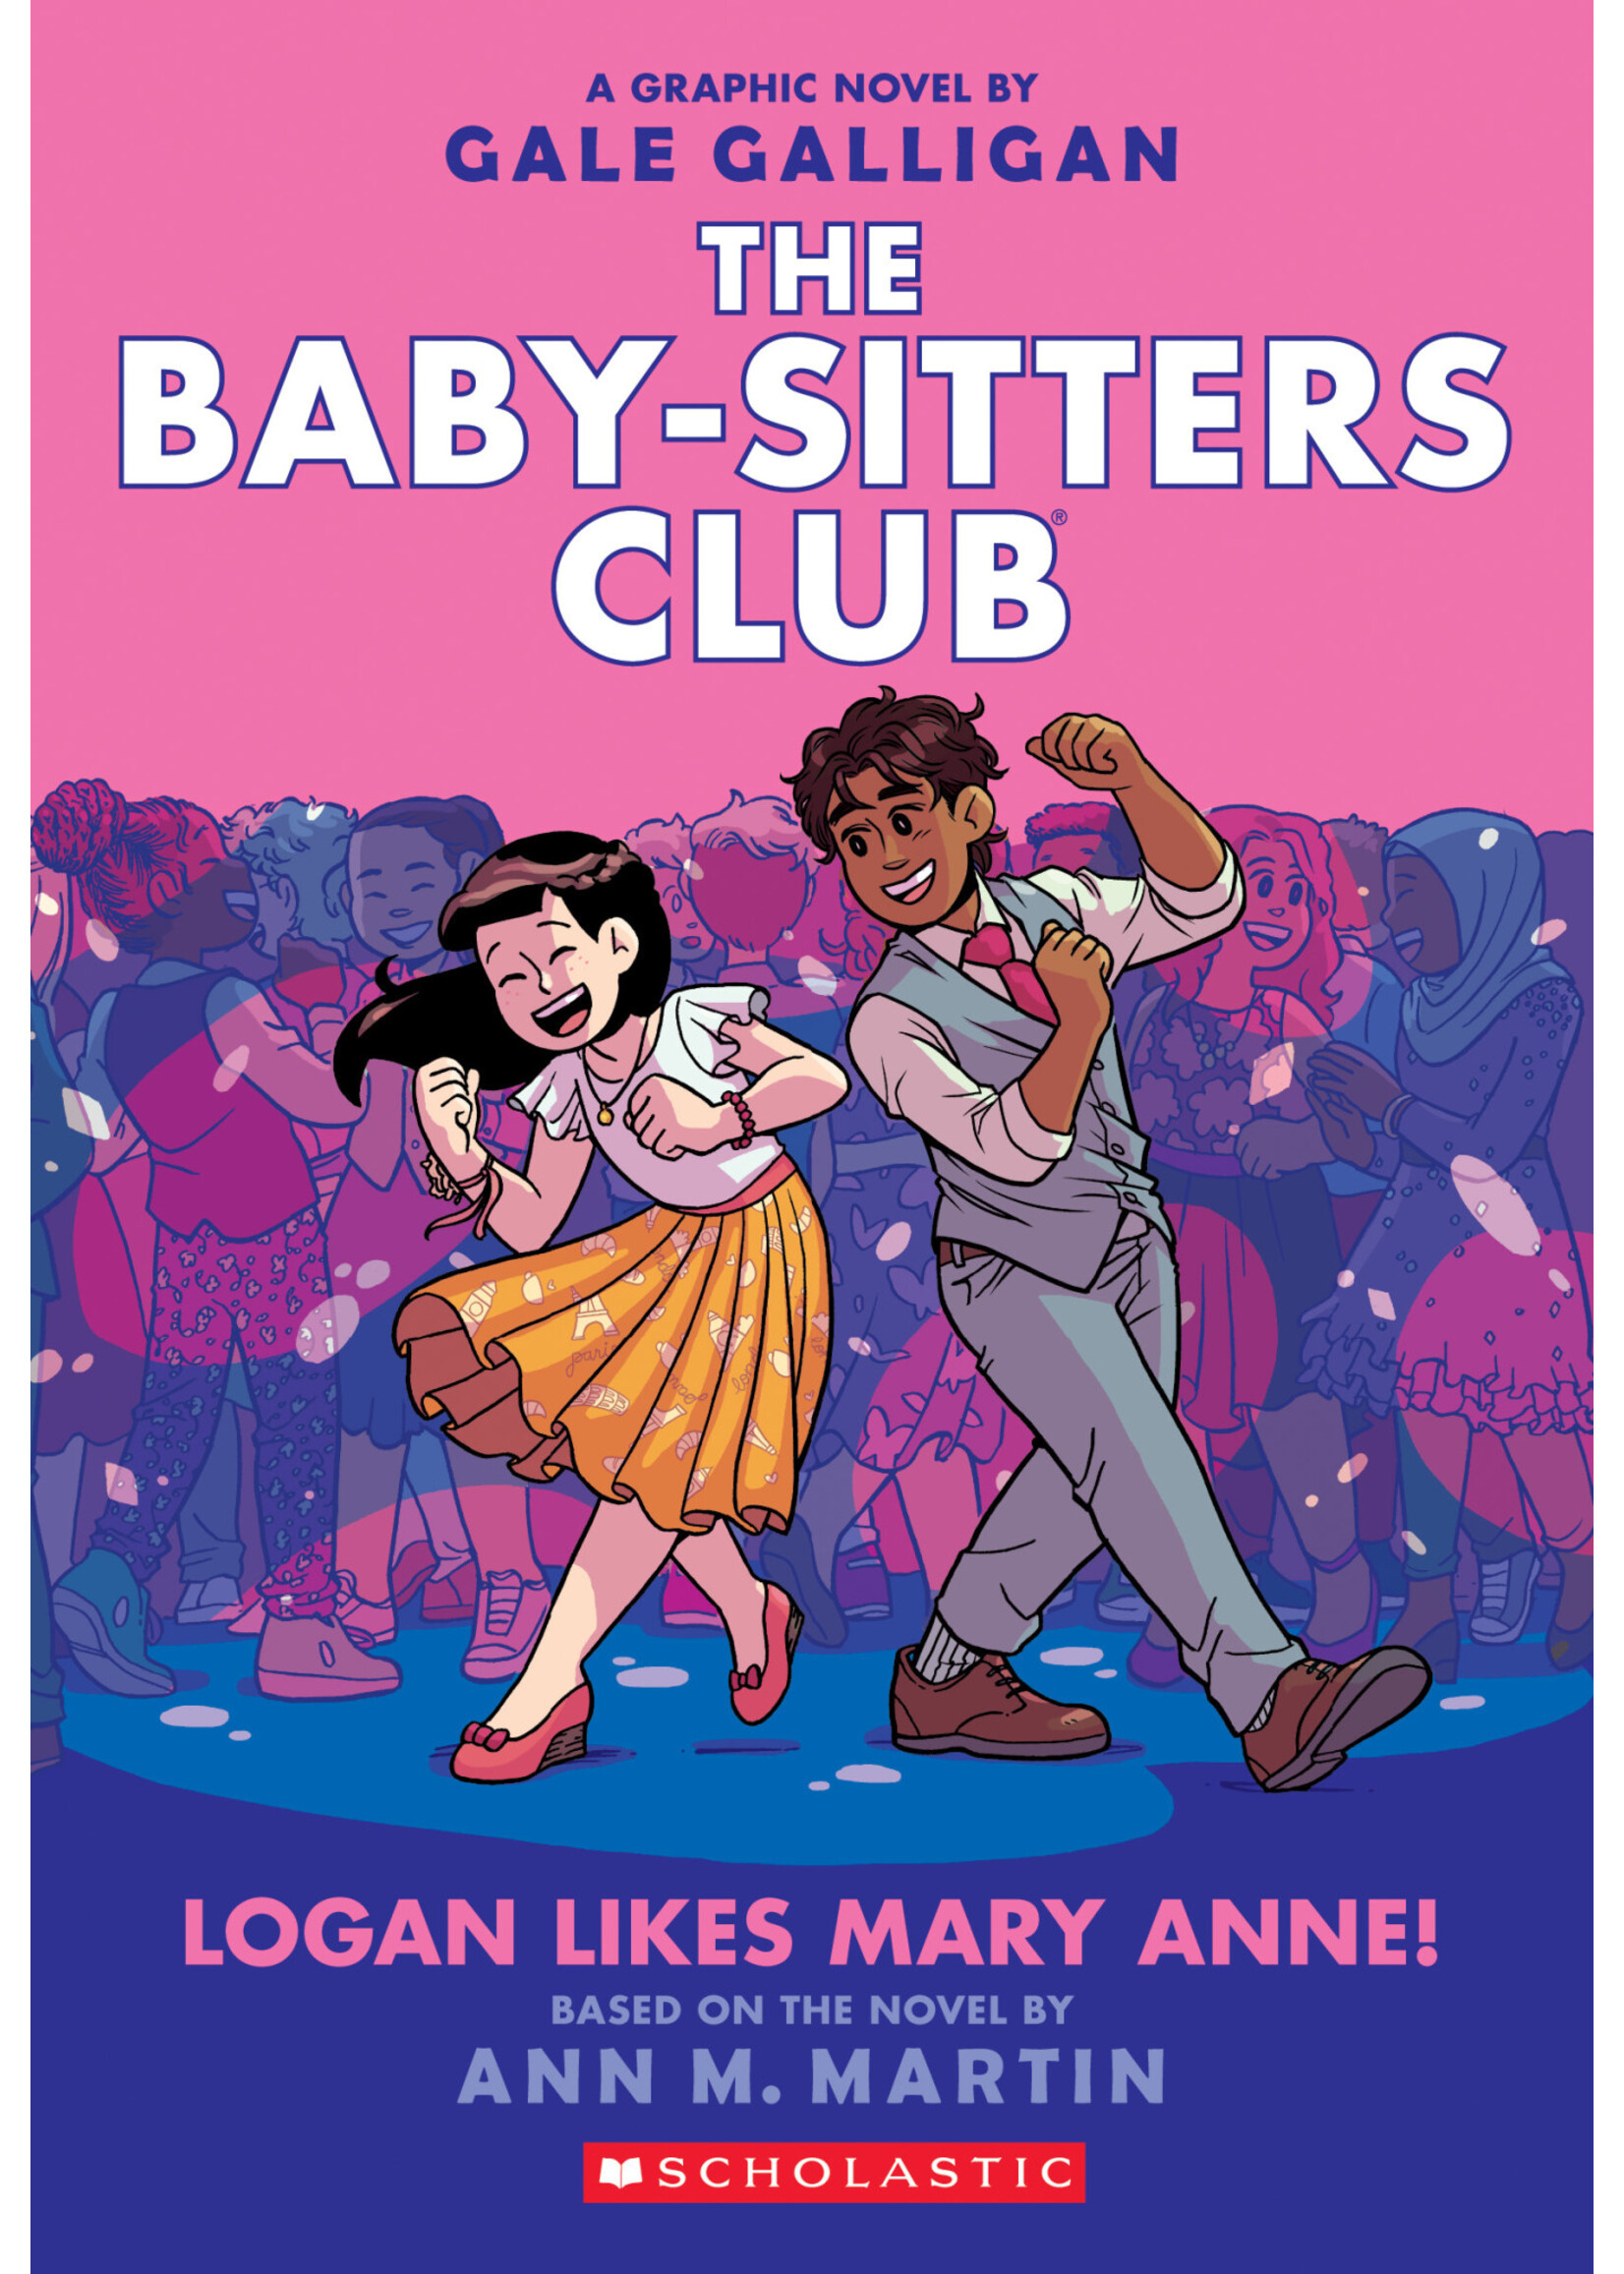 Logan Likes Mary Anne! (Baby-Sitters Club Graphic Novels #8) by Gale Galligan